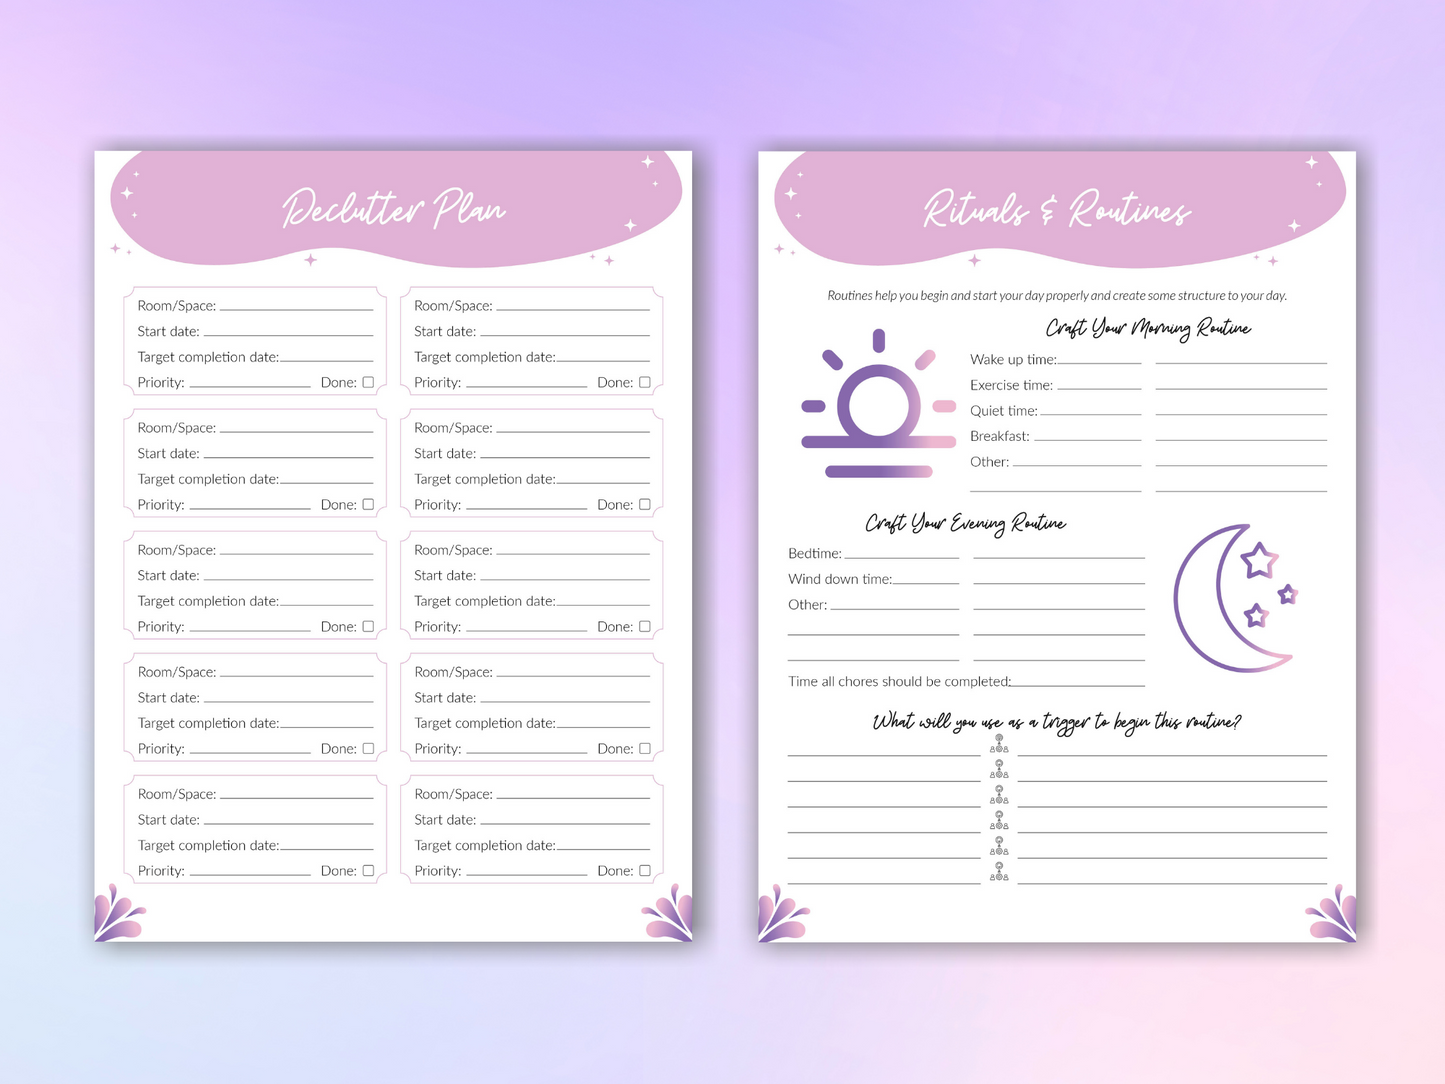 Printable 8.5 x 11 Settled Mind Stress-Relieving Planner